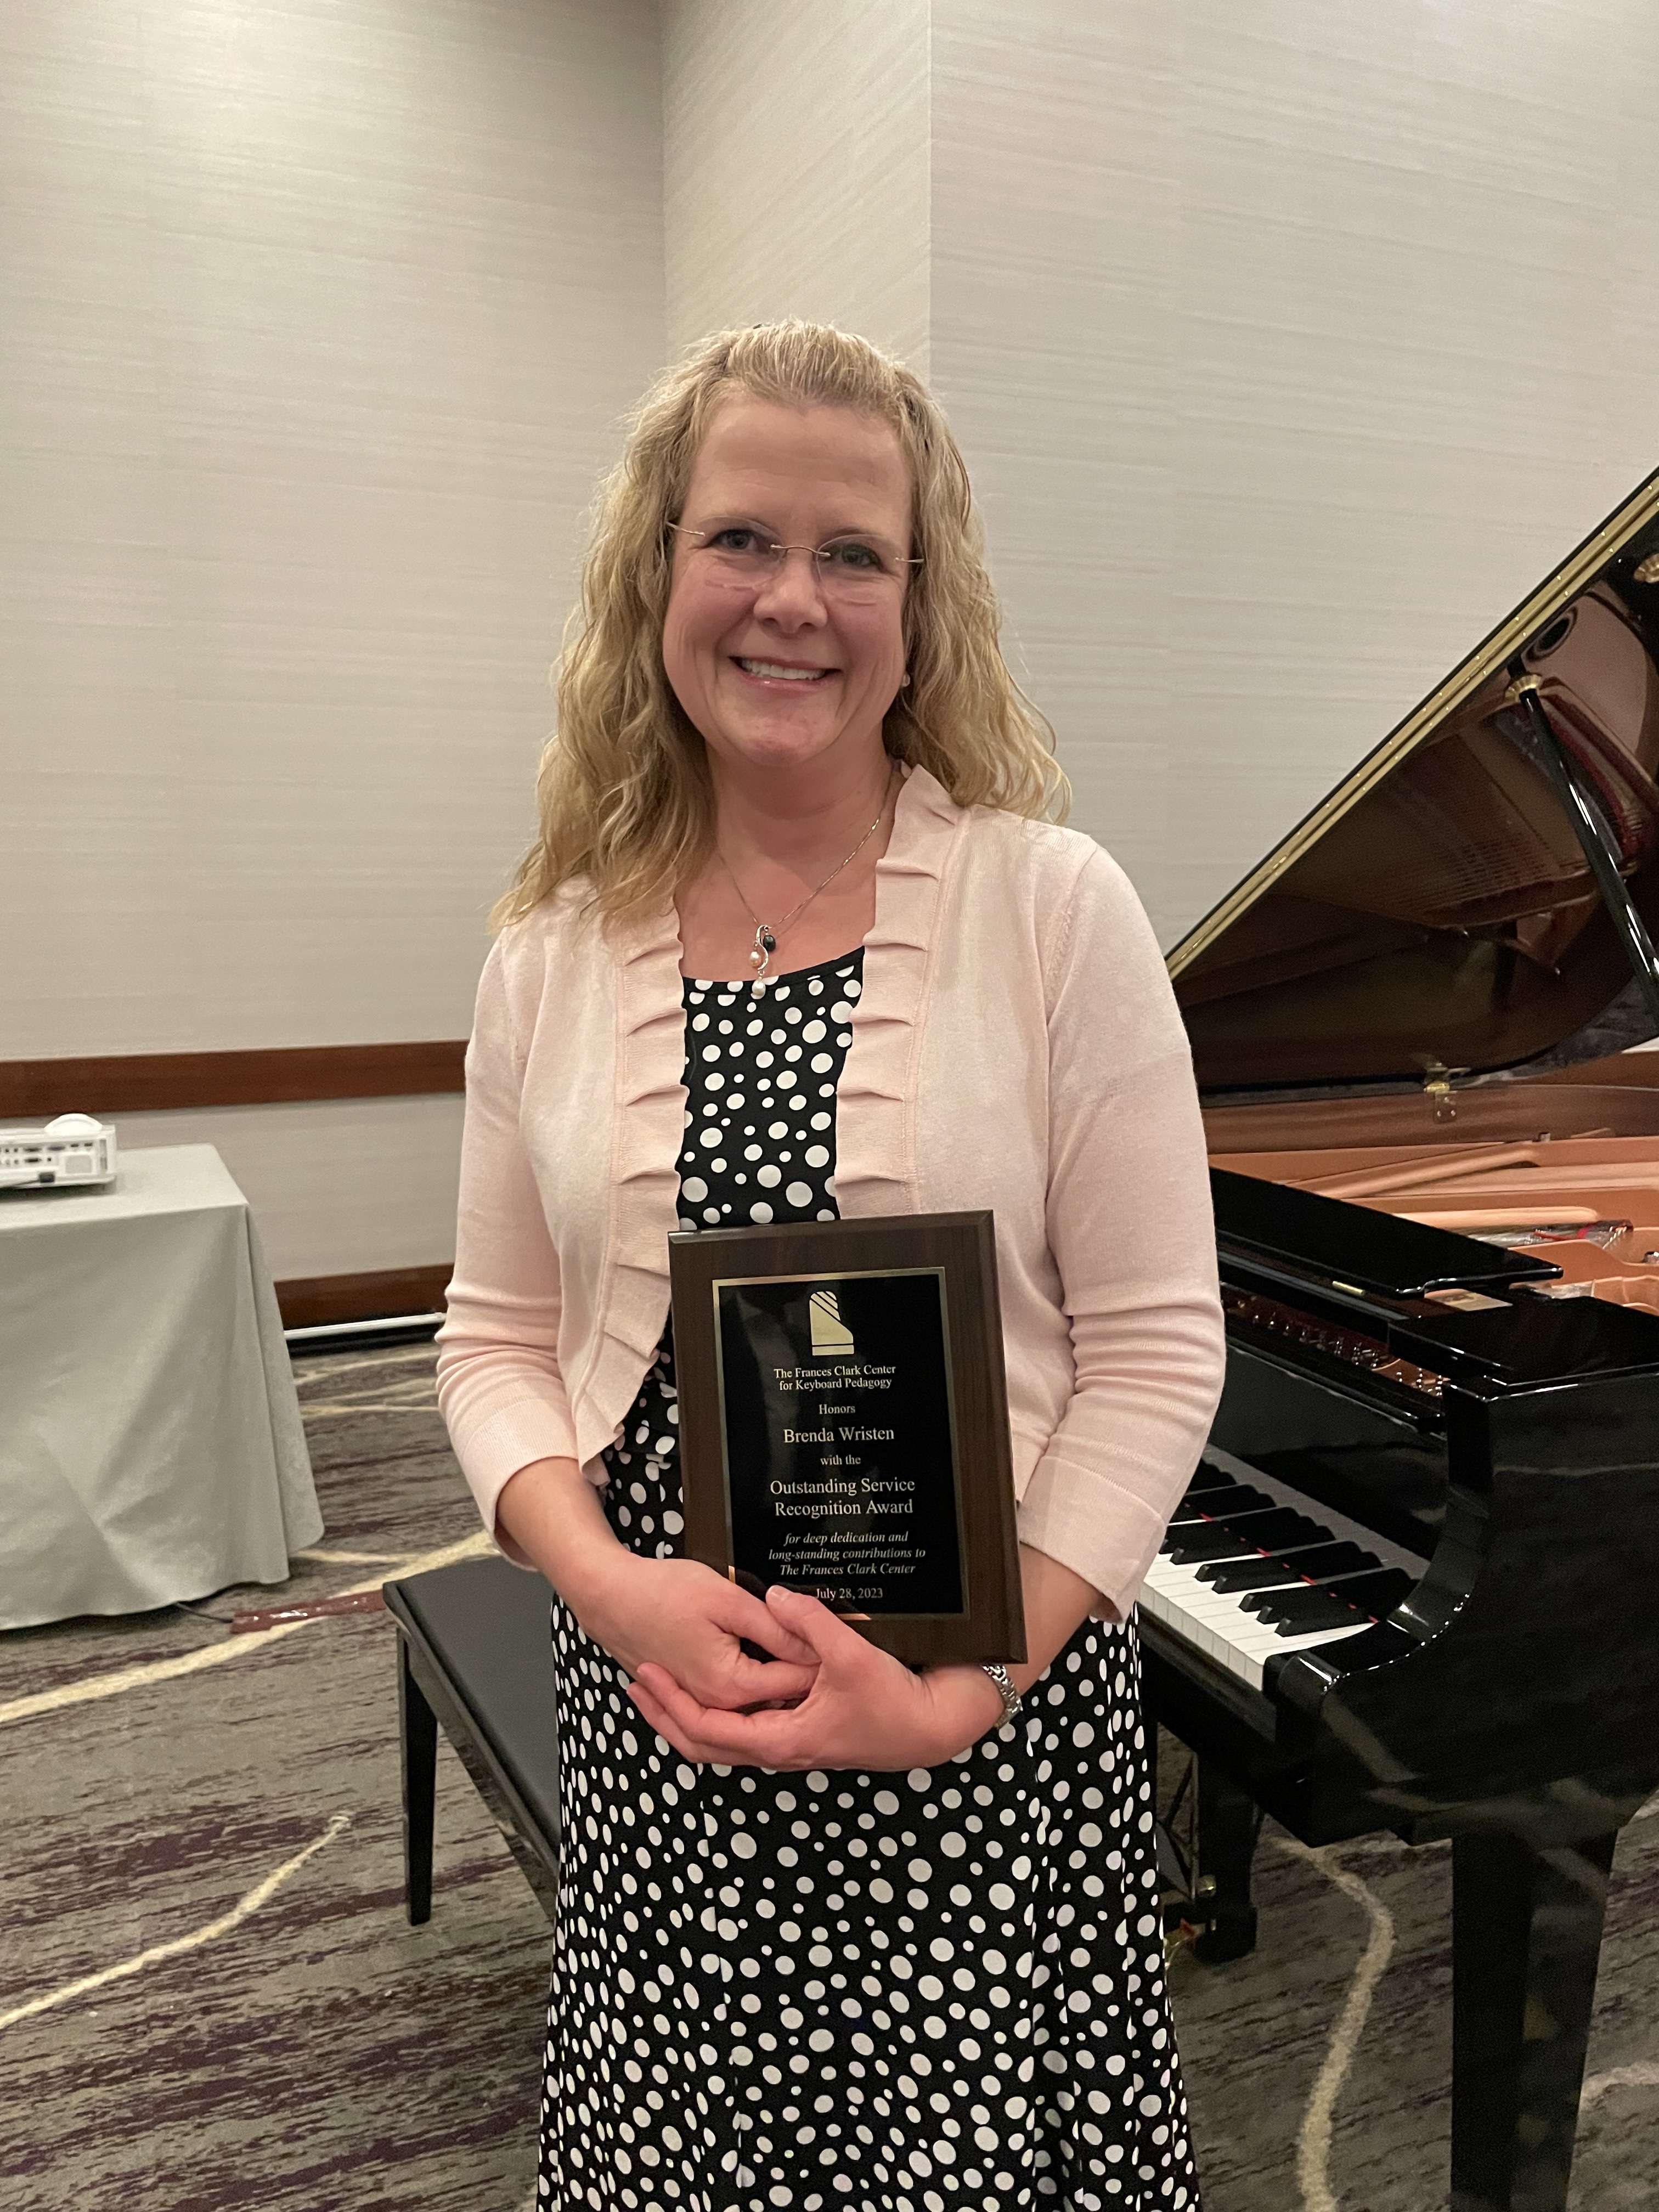 Brenda Wristen received an Outstanding Service Recognition Award by the Frances Clark Center for Keyboard Pedagogy. Courtesy photo.